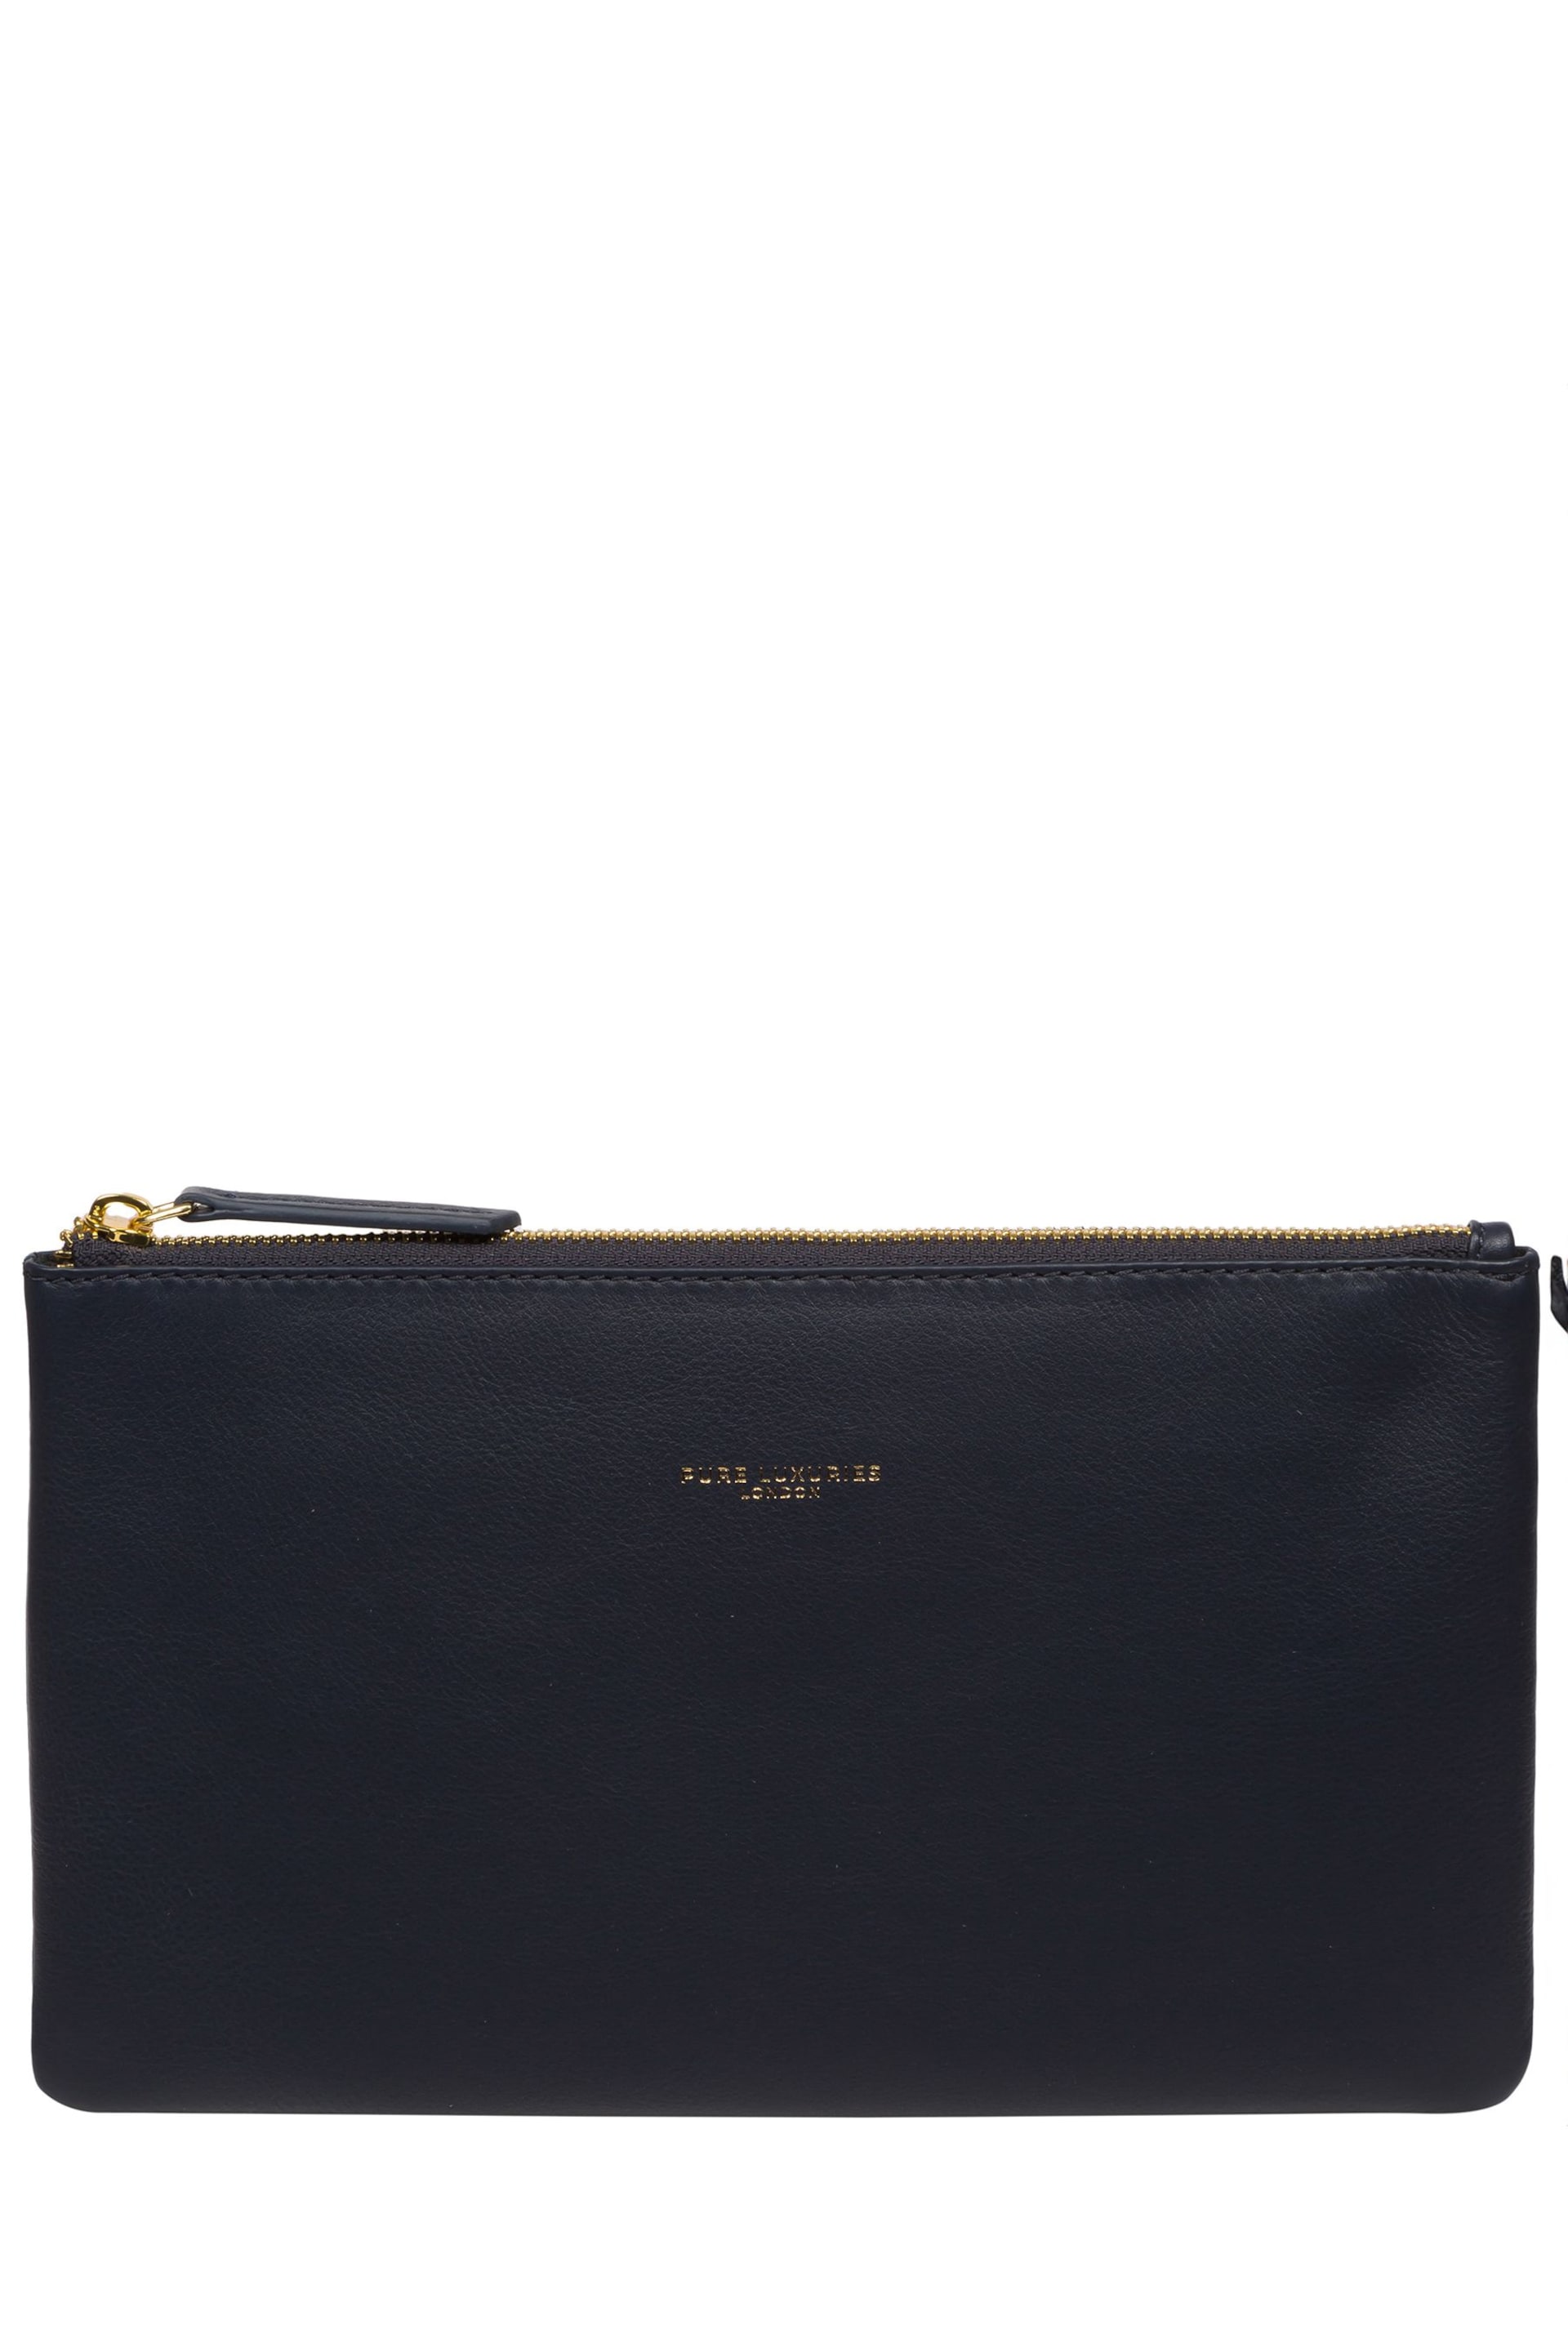 Pure Luxuries London Wilmslow Nappa Leather Clutch Bag - Image 1 of 6